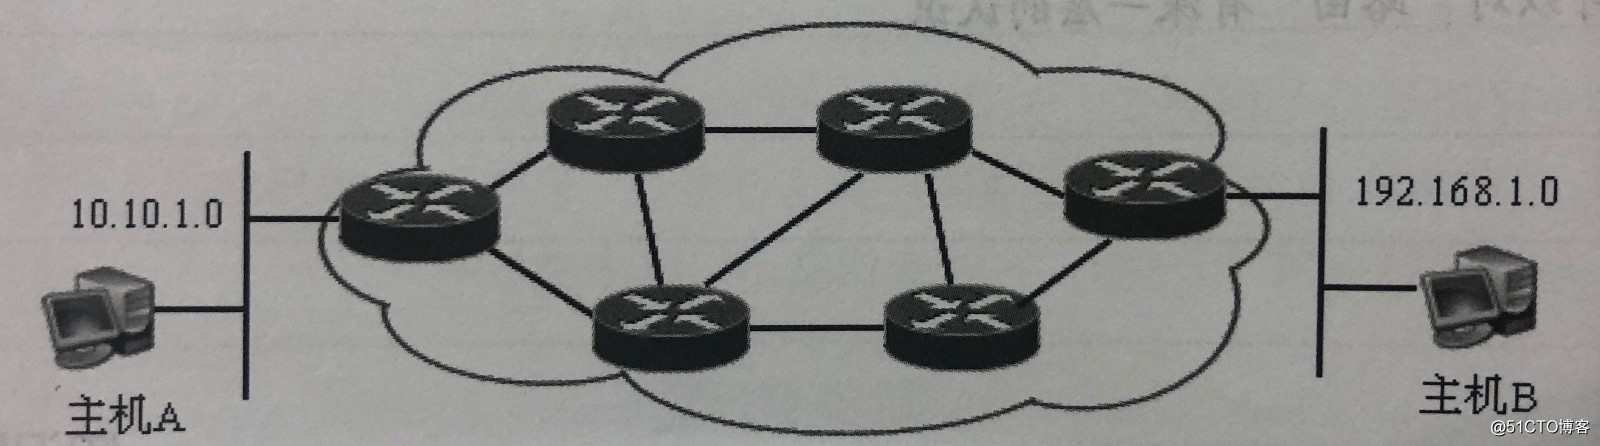 Static routing!  Static routing!  Static routing!  Principle and Configuration